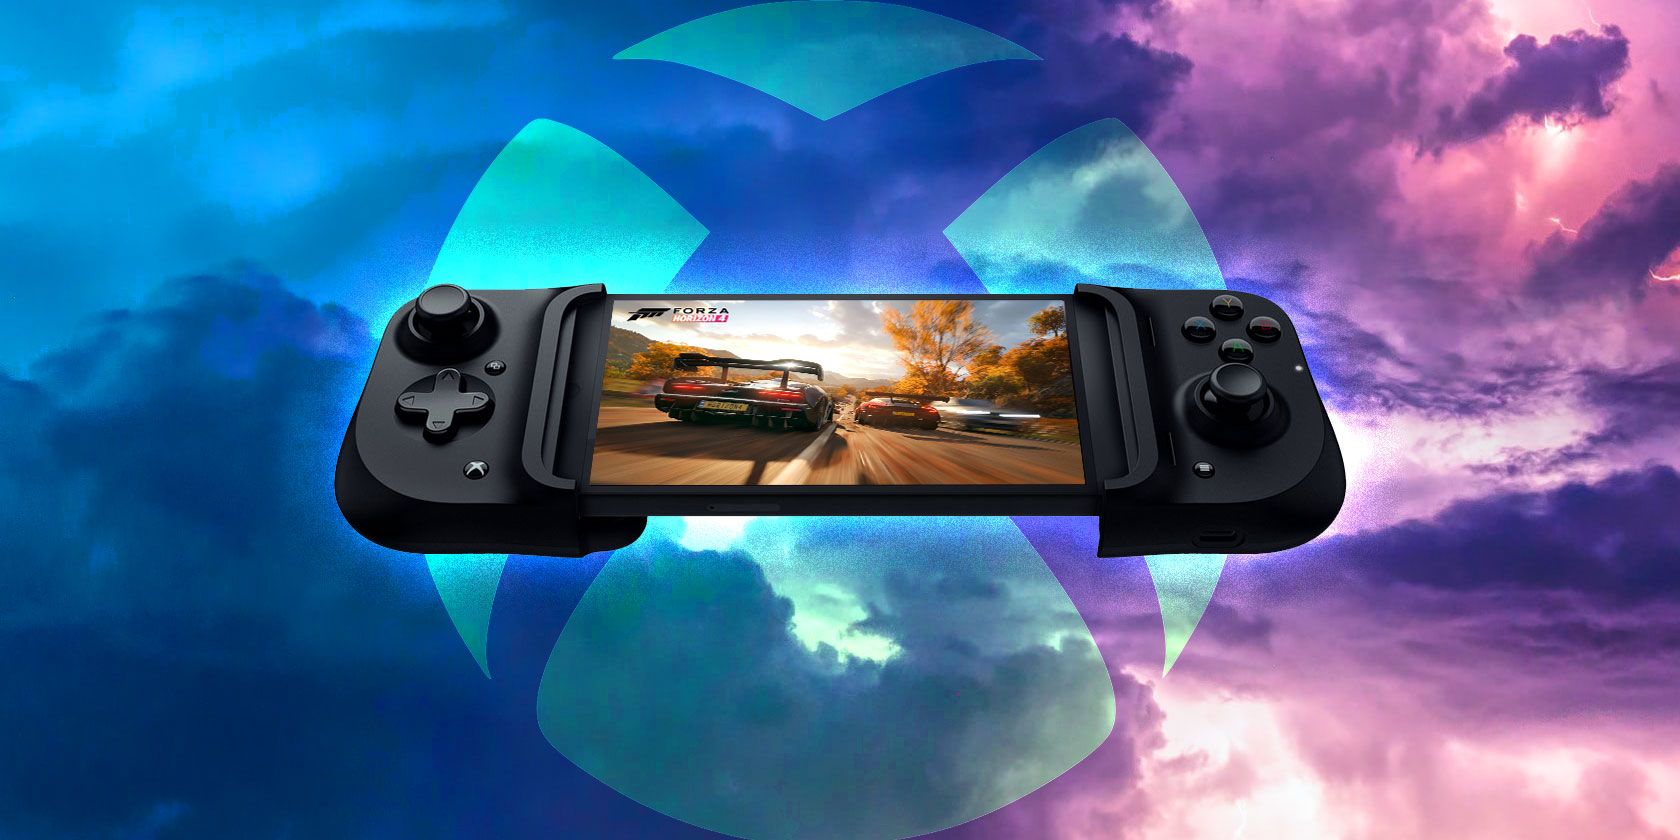 An image of a phone streaming Forza Horizon 4 